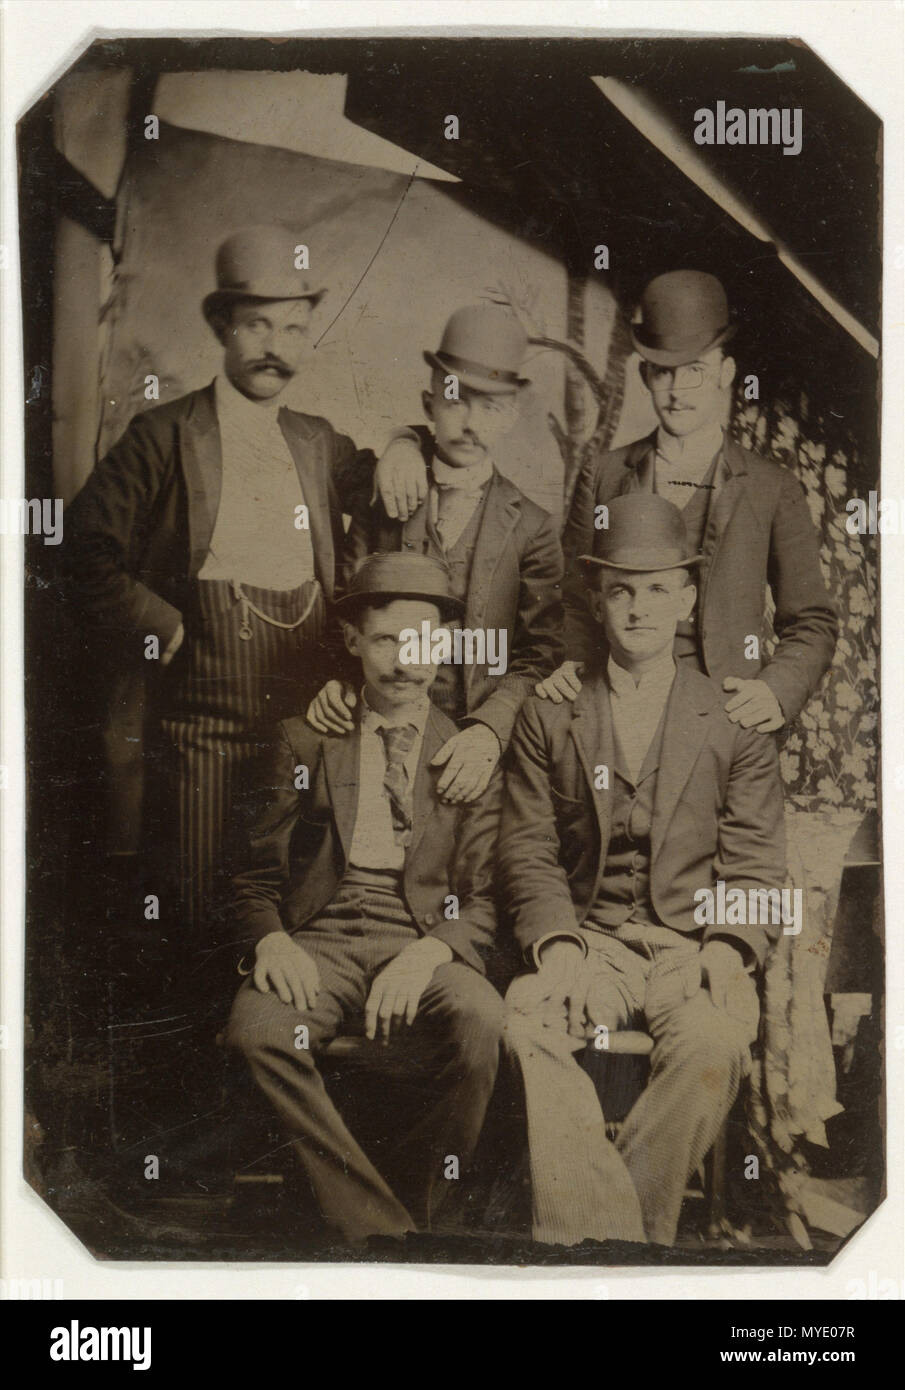 . English: Five Members of the Wild Bunch Unknown Artist Date:  ca. 1892 Medium:  Tintype Dimensions:  Image: 8.4 x 6.2 cm (3 5/16 x 2 7/16 in.) Classification:  Photographs Credit Line:  Gilman Collection, Gift of The Howard Gilman Foundation, 2005 Accession Number:  2005.100.111 This artwork is not on display  Description The Wild Bunch was the largest and most notorious band of outlaws in the American West. Led by two gunmen better known by their aliases, Butch Cassidy (Robert LeRoy Parker) and Kid Curry (Harvey Logan), the Wild Bunch was an informal trust of thieves and rustlers that preye Stock Photo